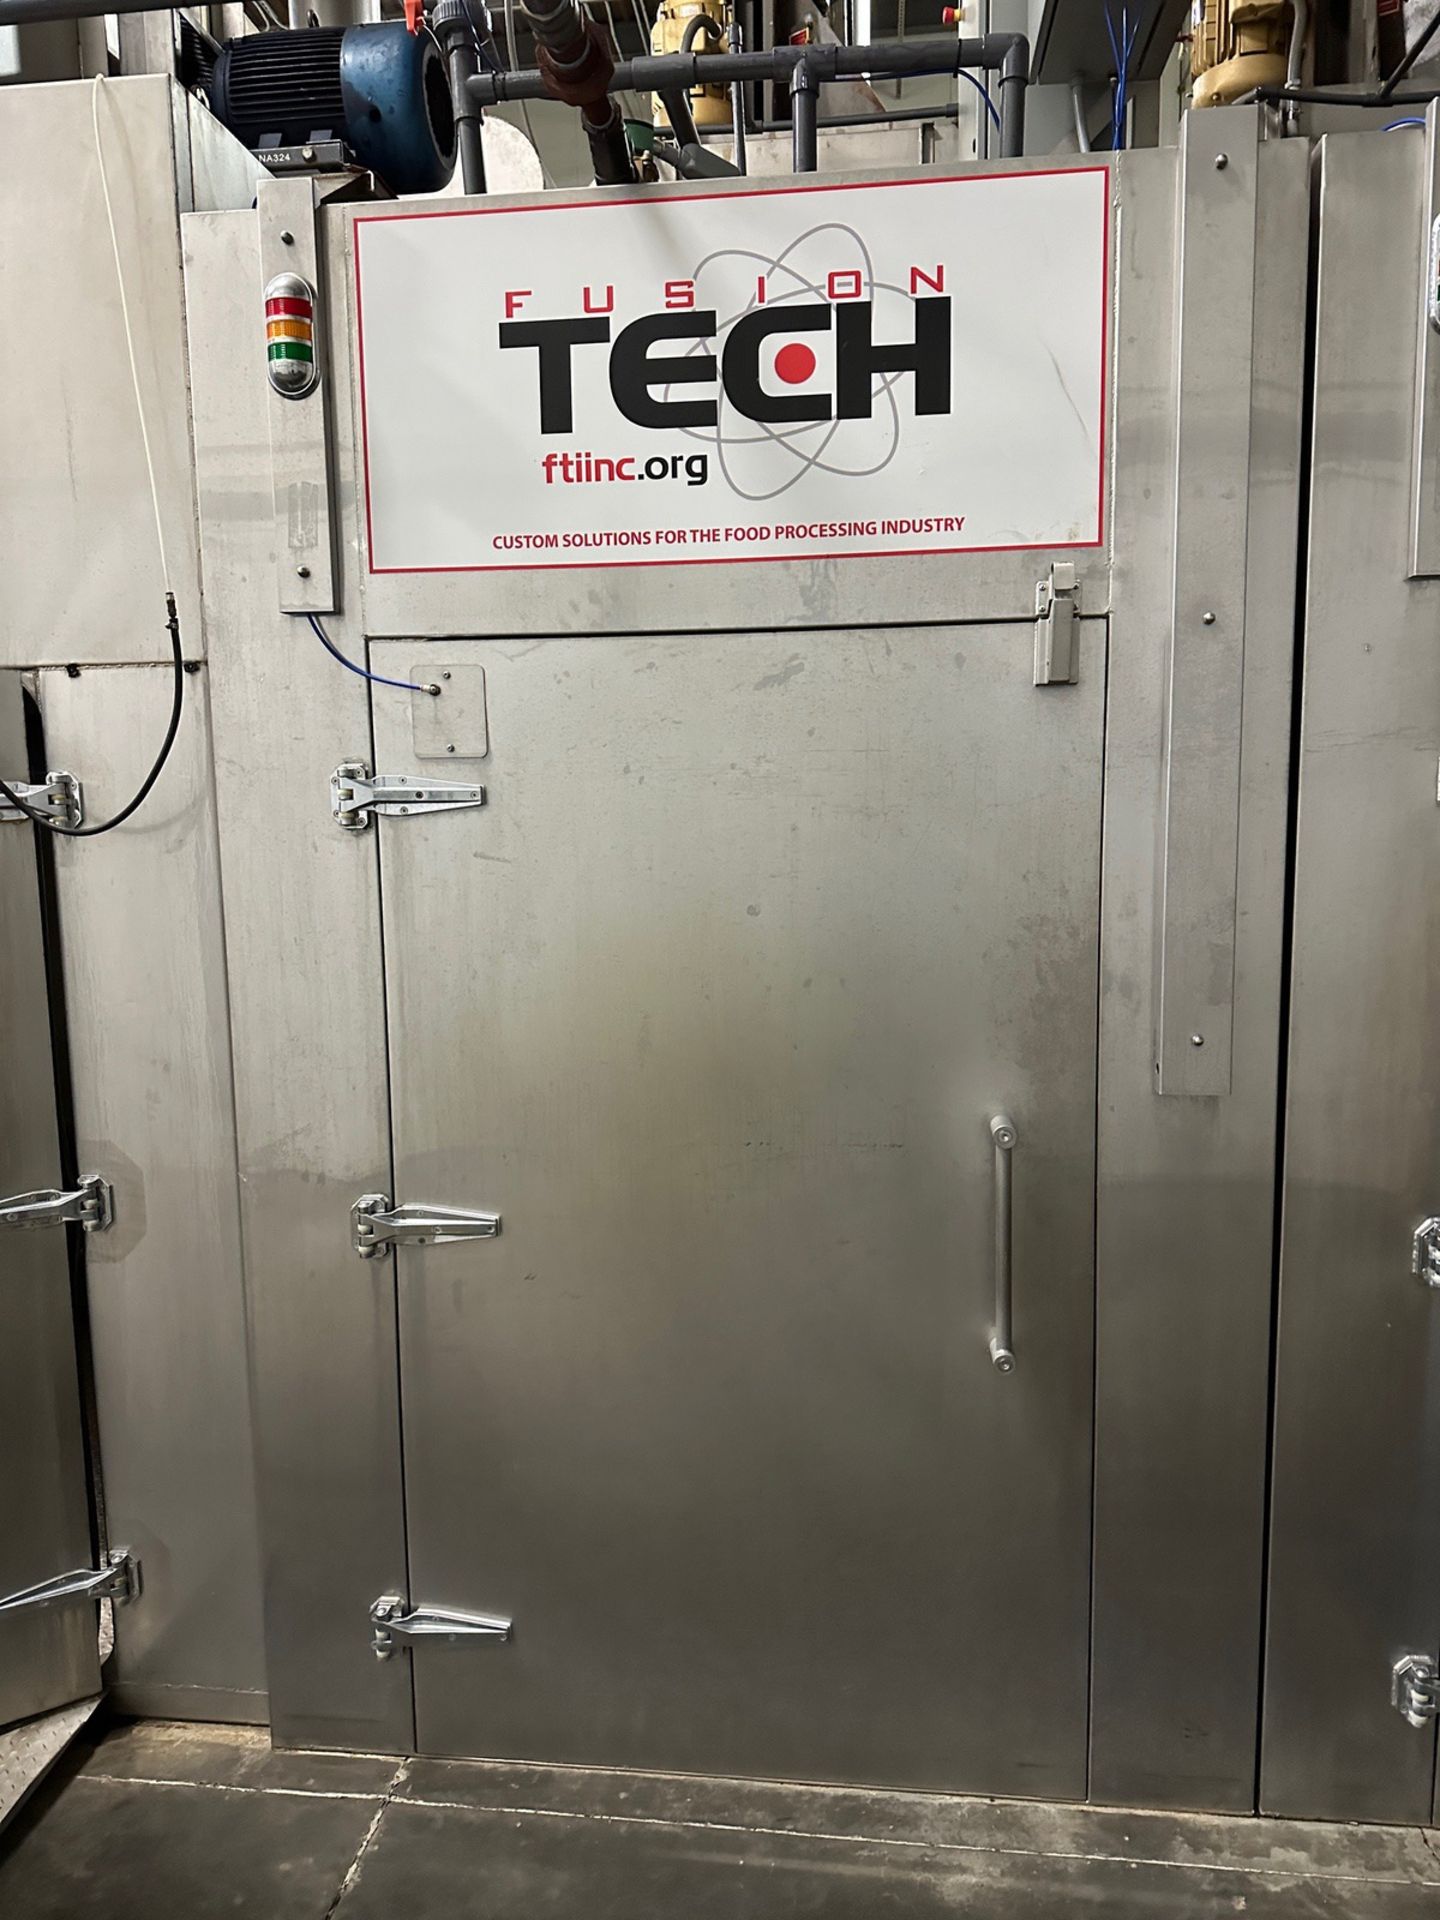 2018 Fusion Tech SM-04100-GP Oven / Smokehouse (Approx. 70" x 17'6" w 80" Wide Door) | Rig Fee $4500 - Image 3 of 4